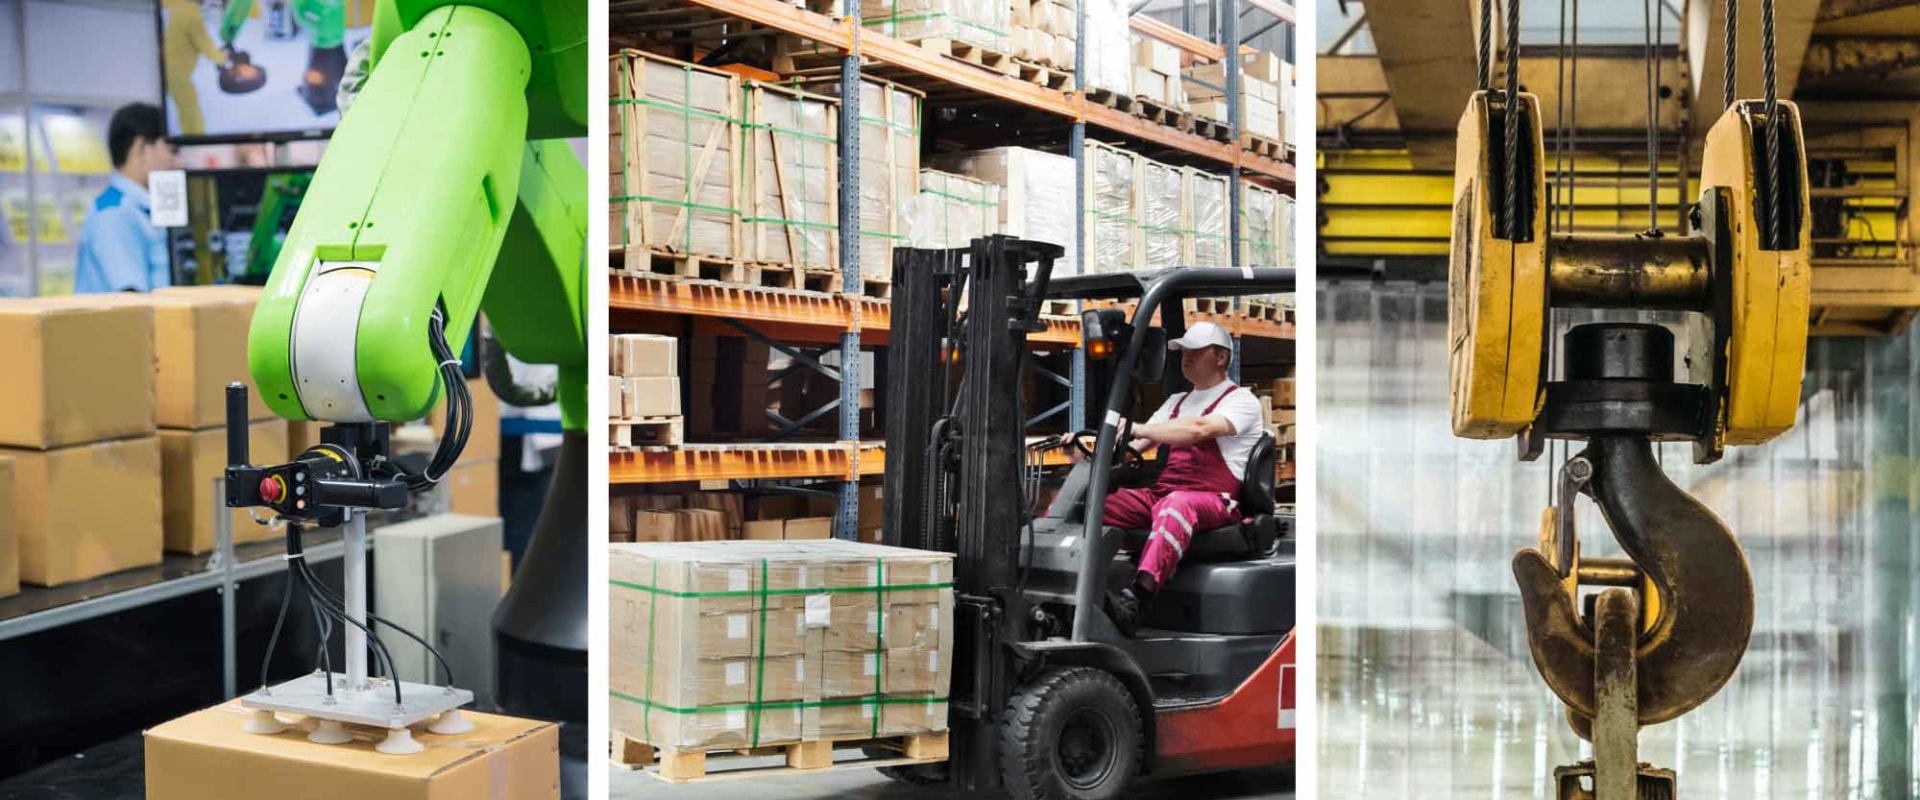 Why material handling is important in industries?